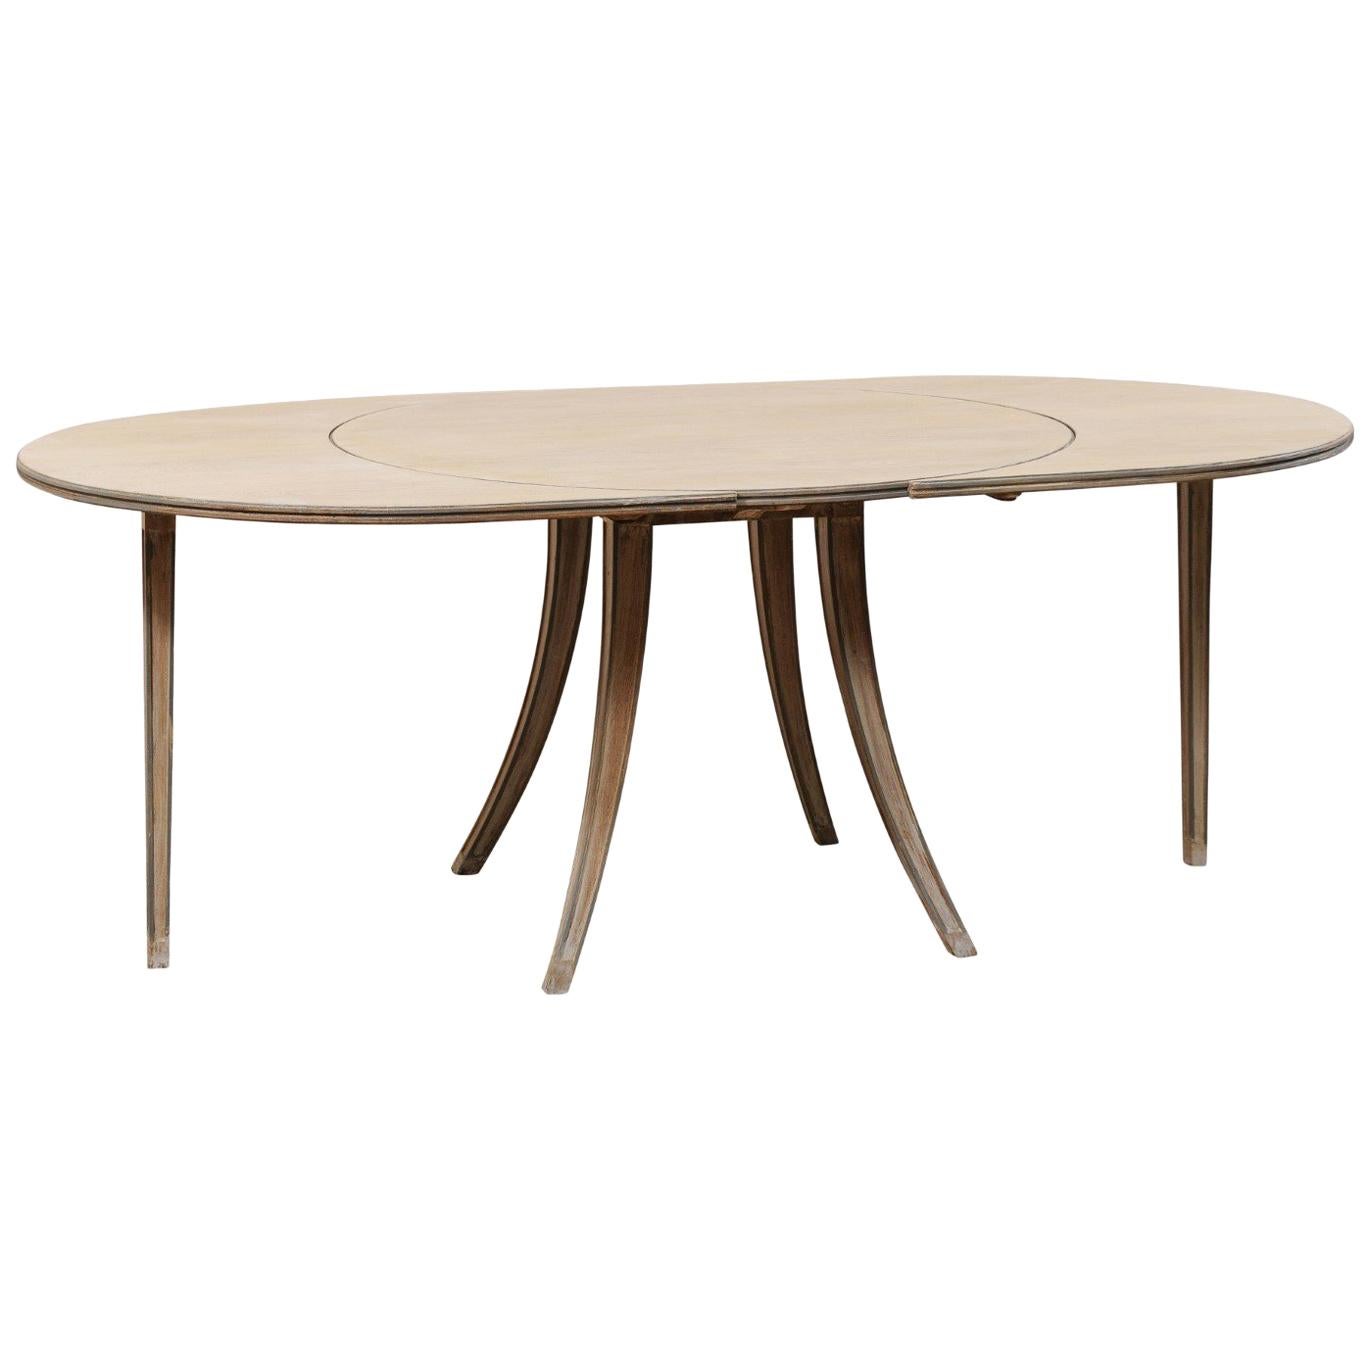 French Mid-century Modern Dining or Center Table, Transitions from Oval to Round